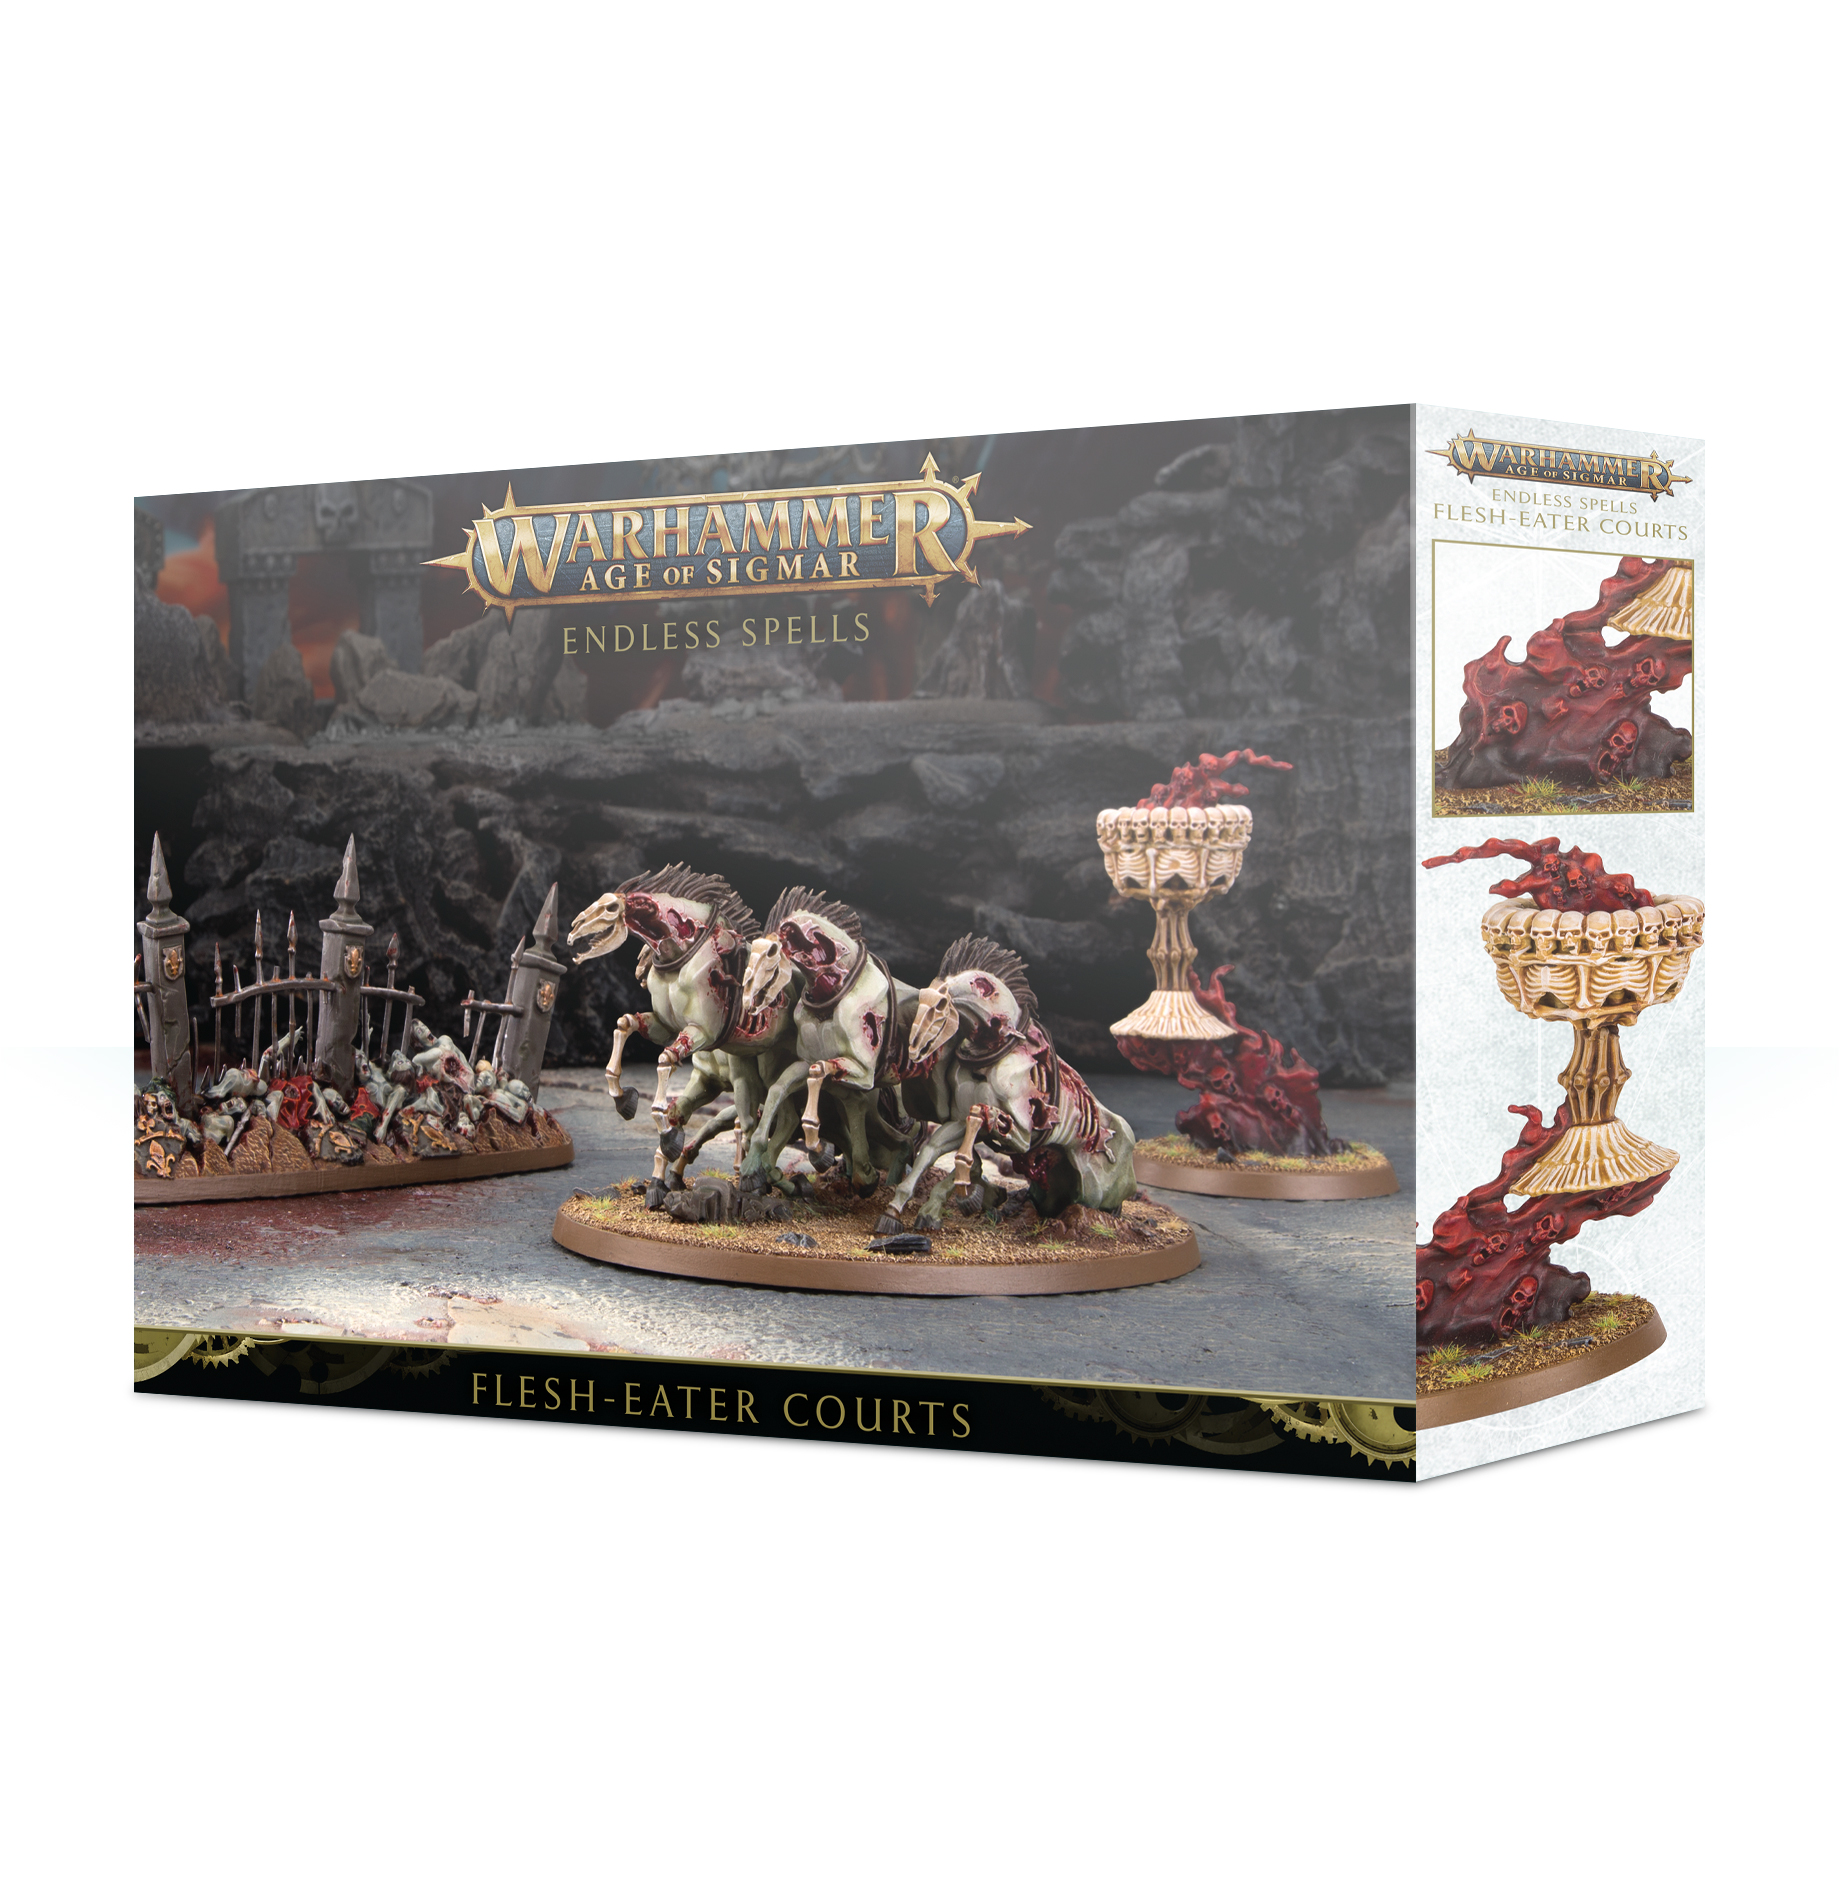 Warhammer Age of Sigmar: Flesh-Eater Courts: Endless Spells 